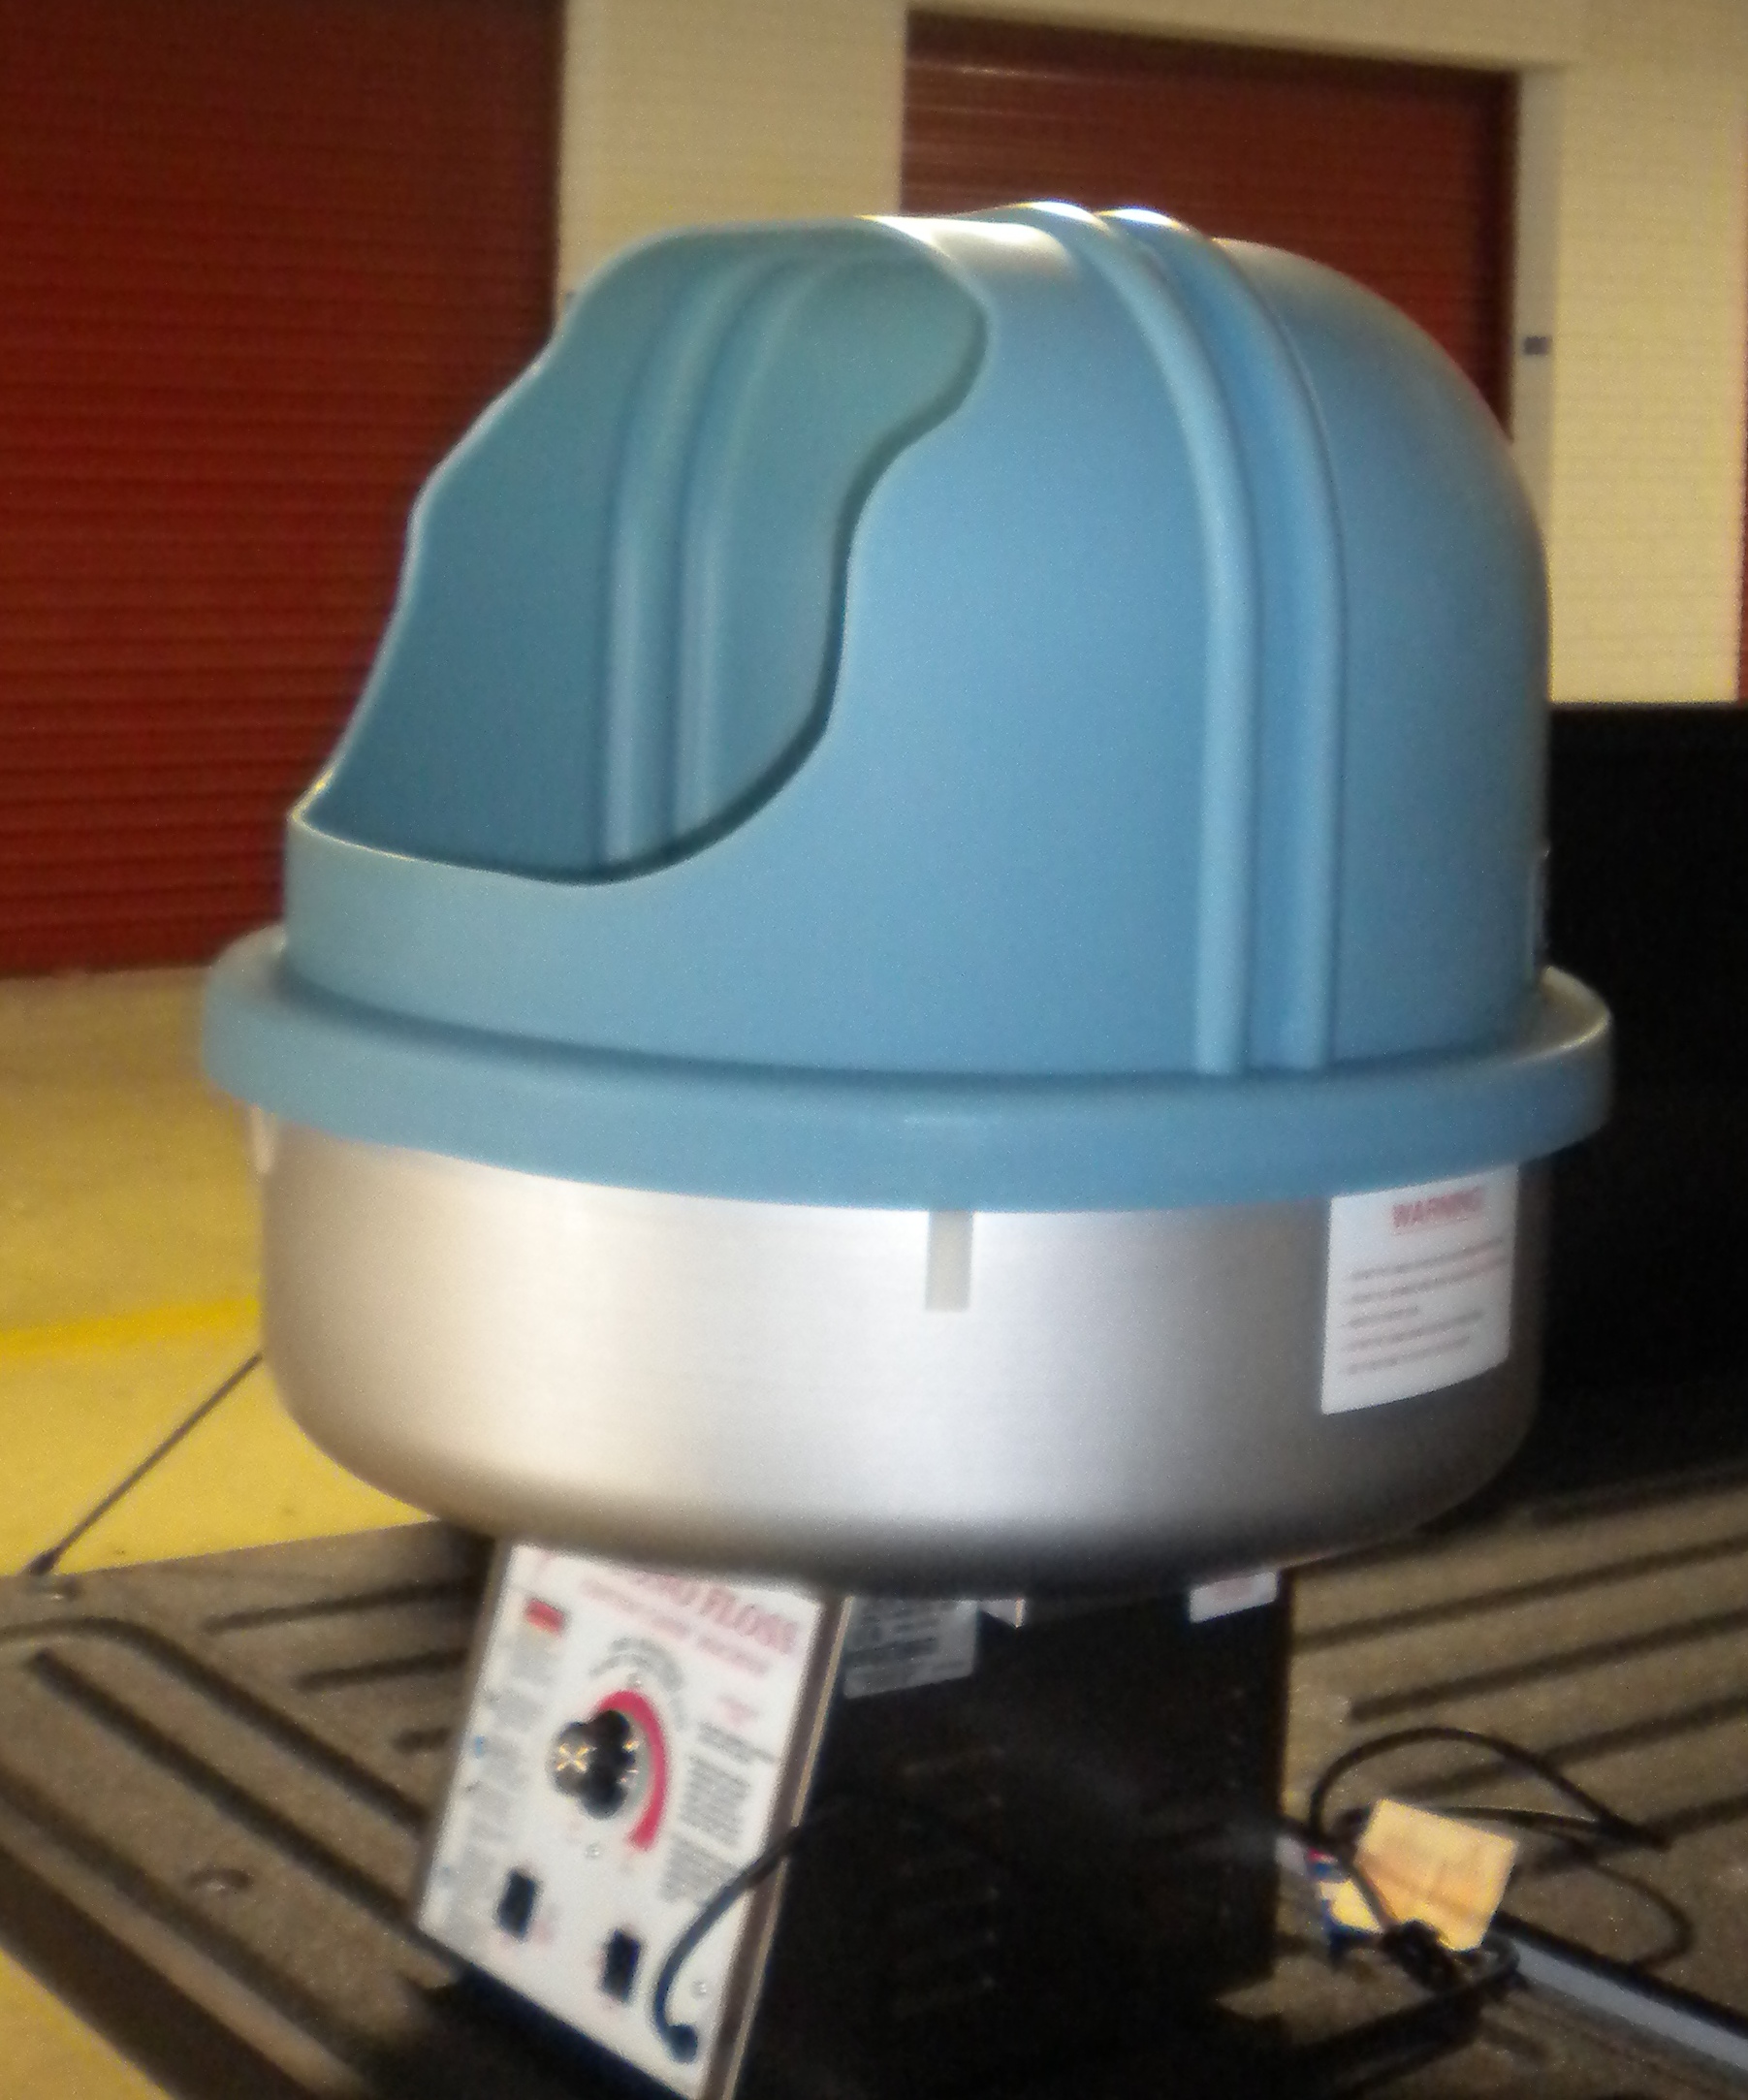 Blue Cotton Candy Machine Right View